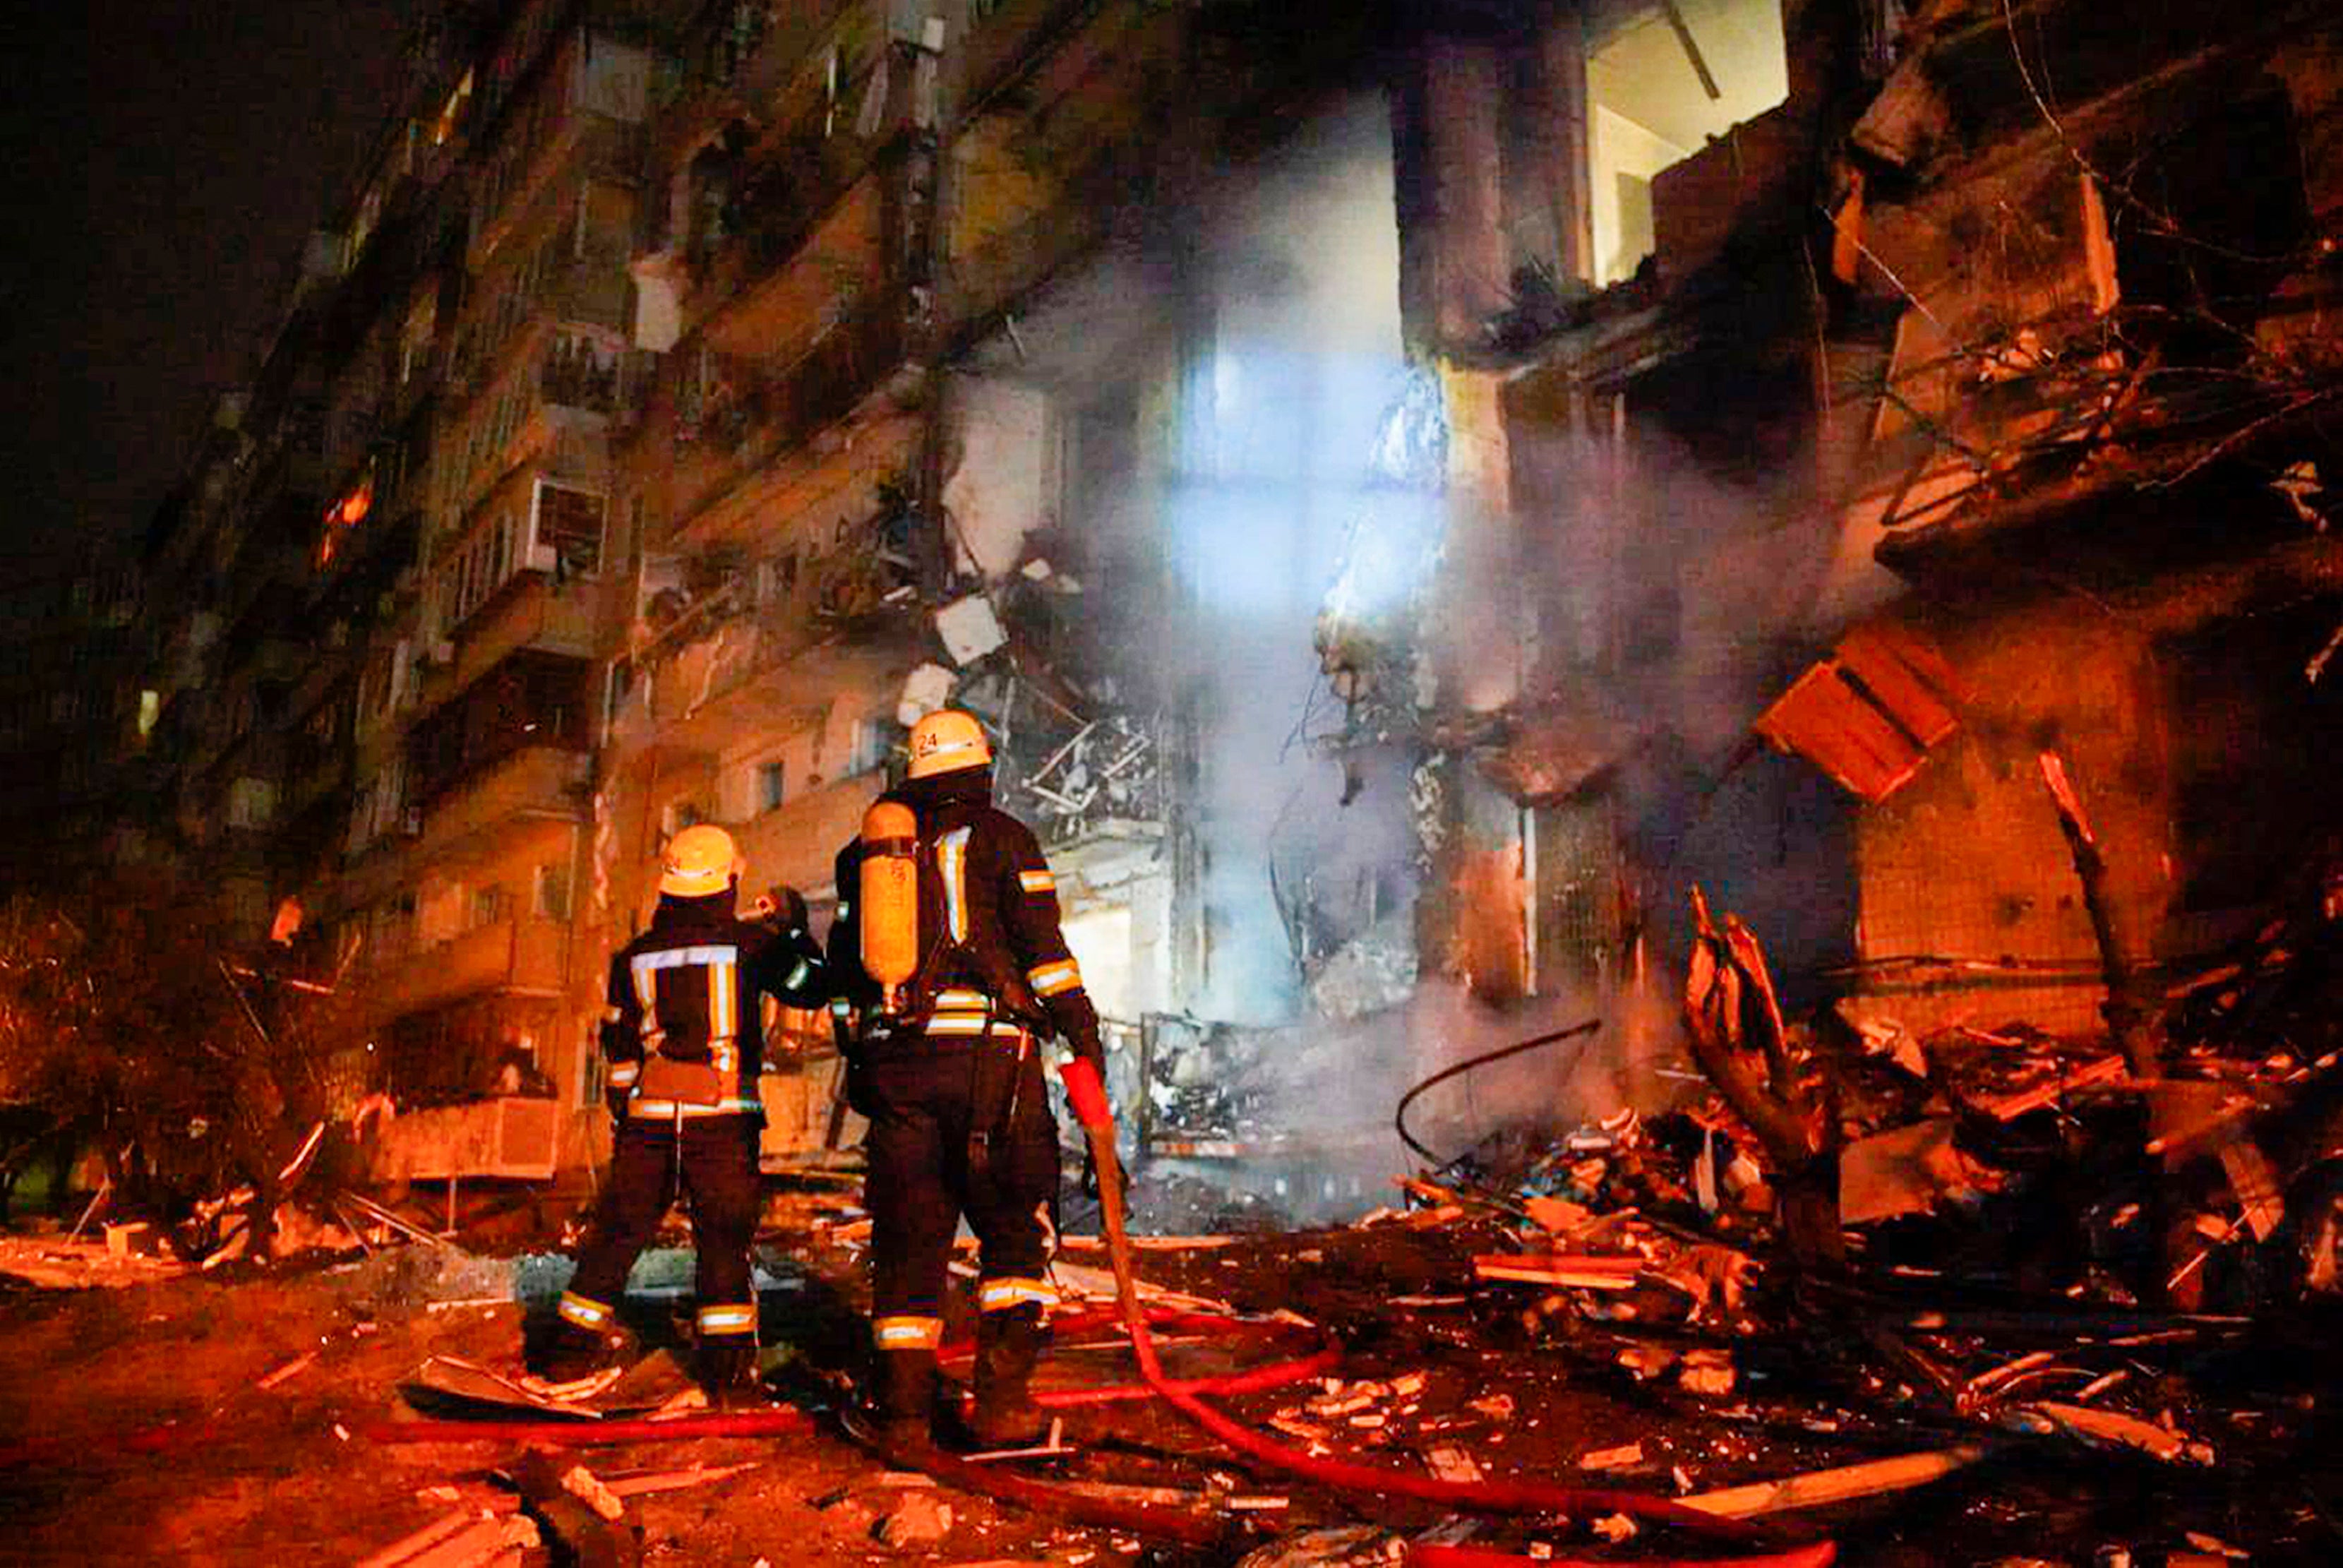 Firefighters inspect the damage at a building following a rocket attack in Kyiv on Friday